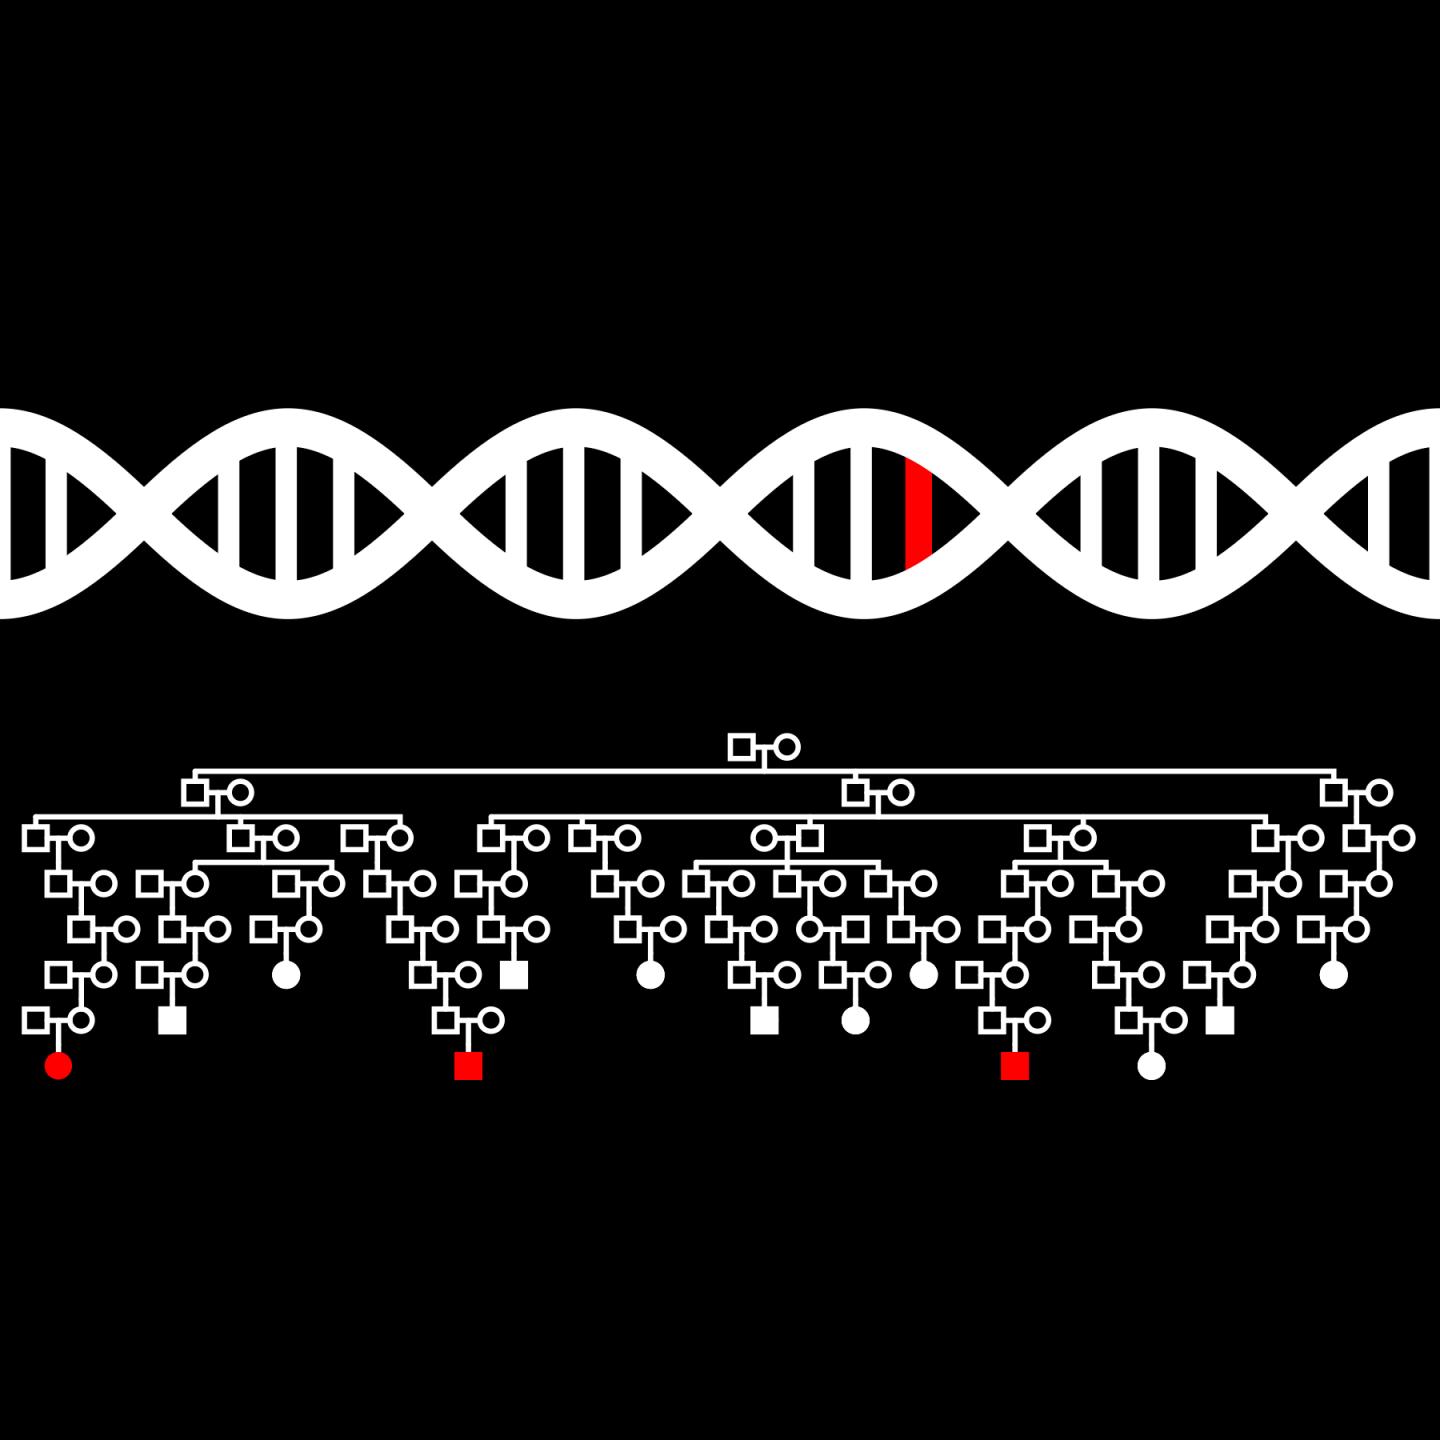 Changes in Genes Involved in DNA Repair and Packaging Linked to Risk of Multiple Myeloma